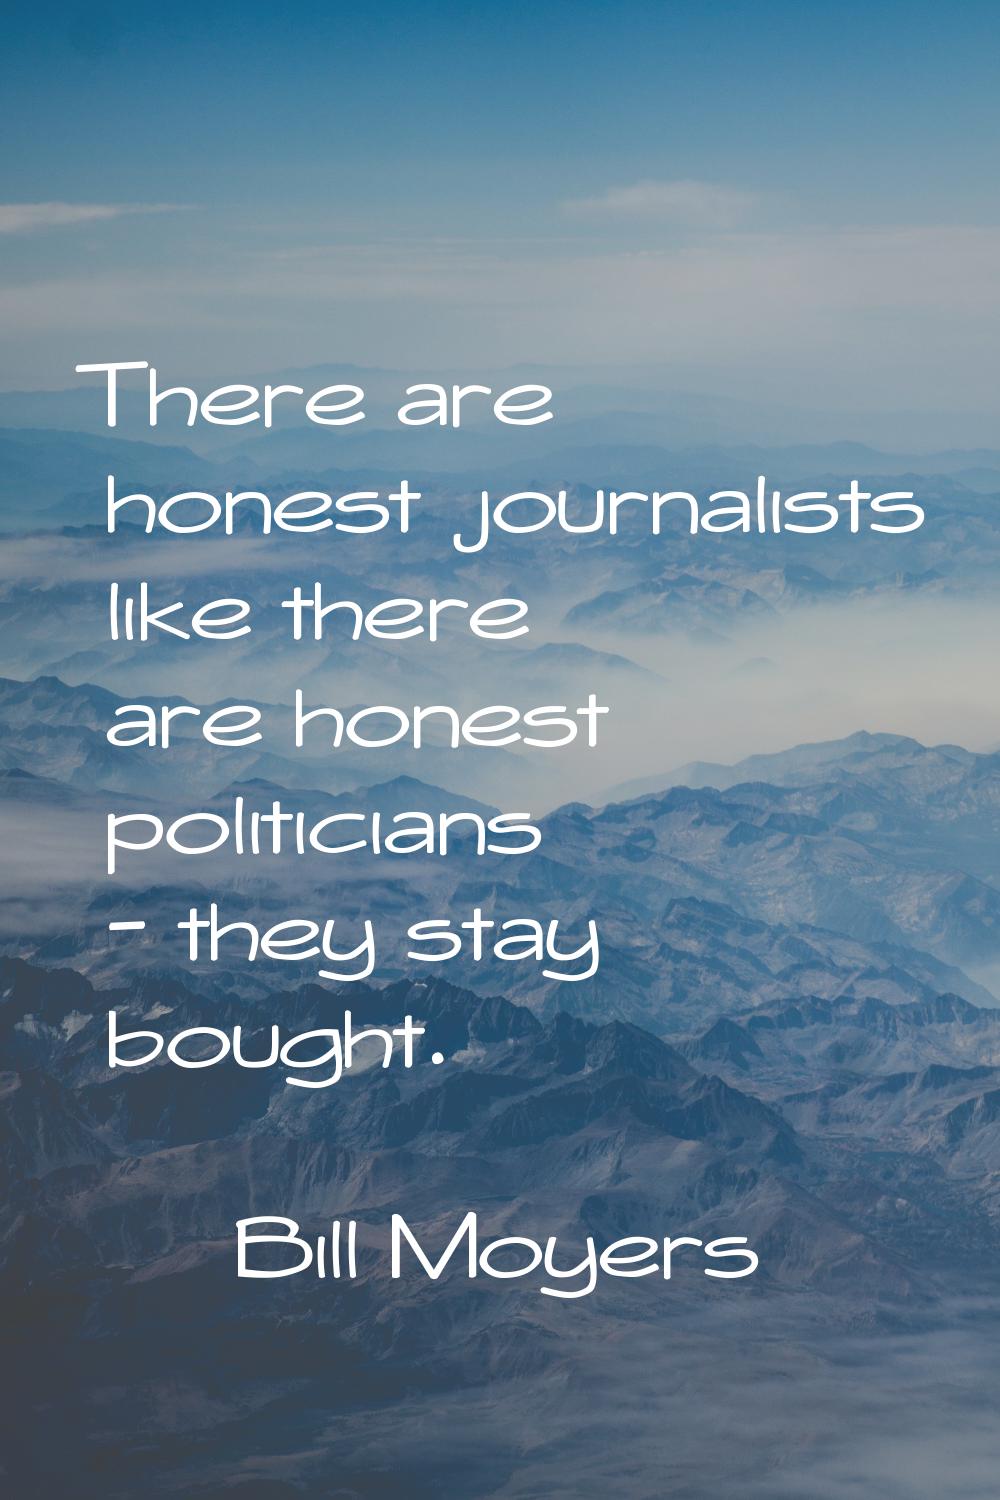 There are honest journalists like there are honest politicians - they stay bought.